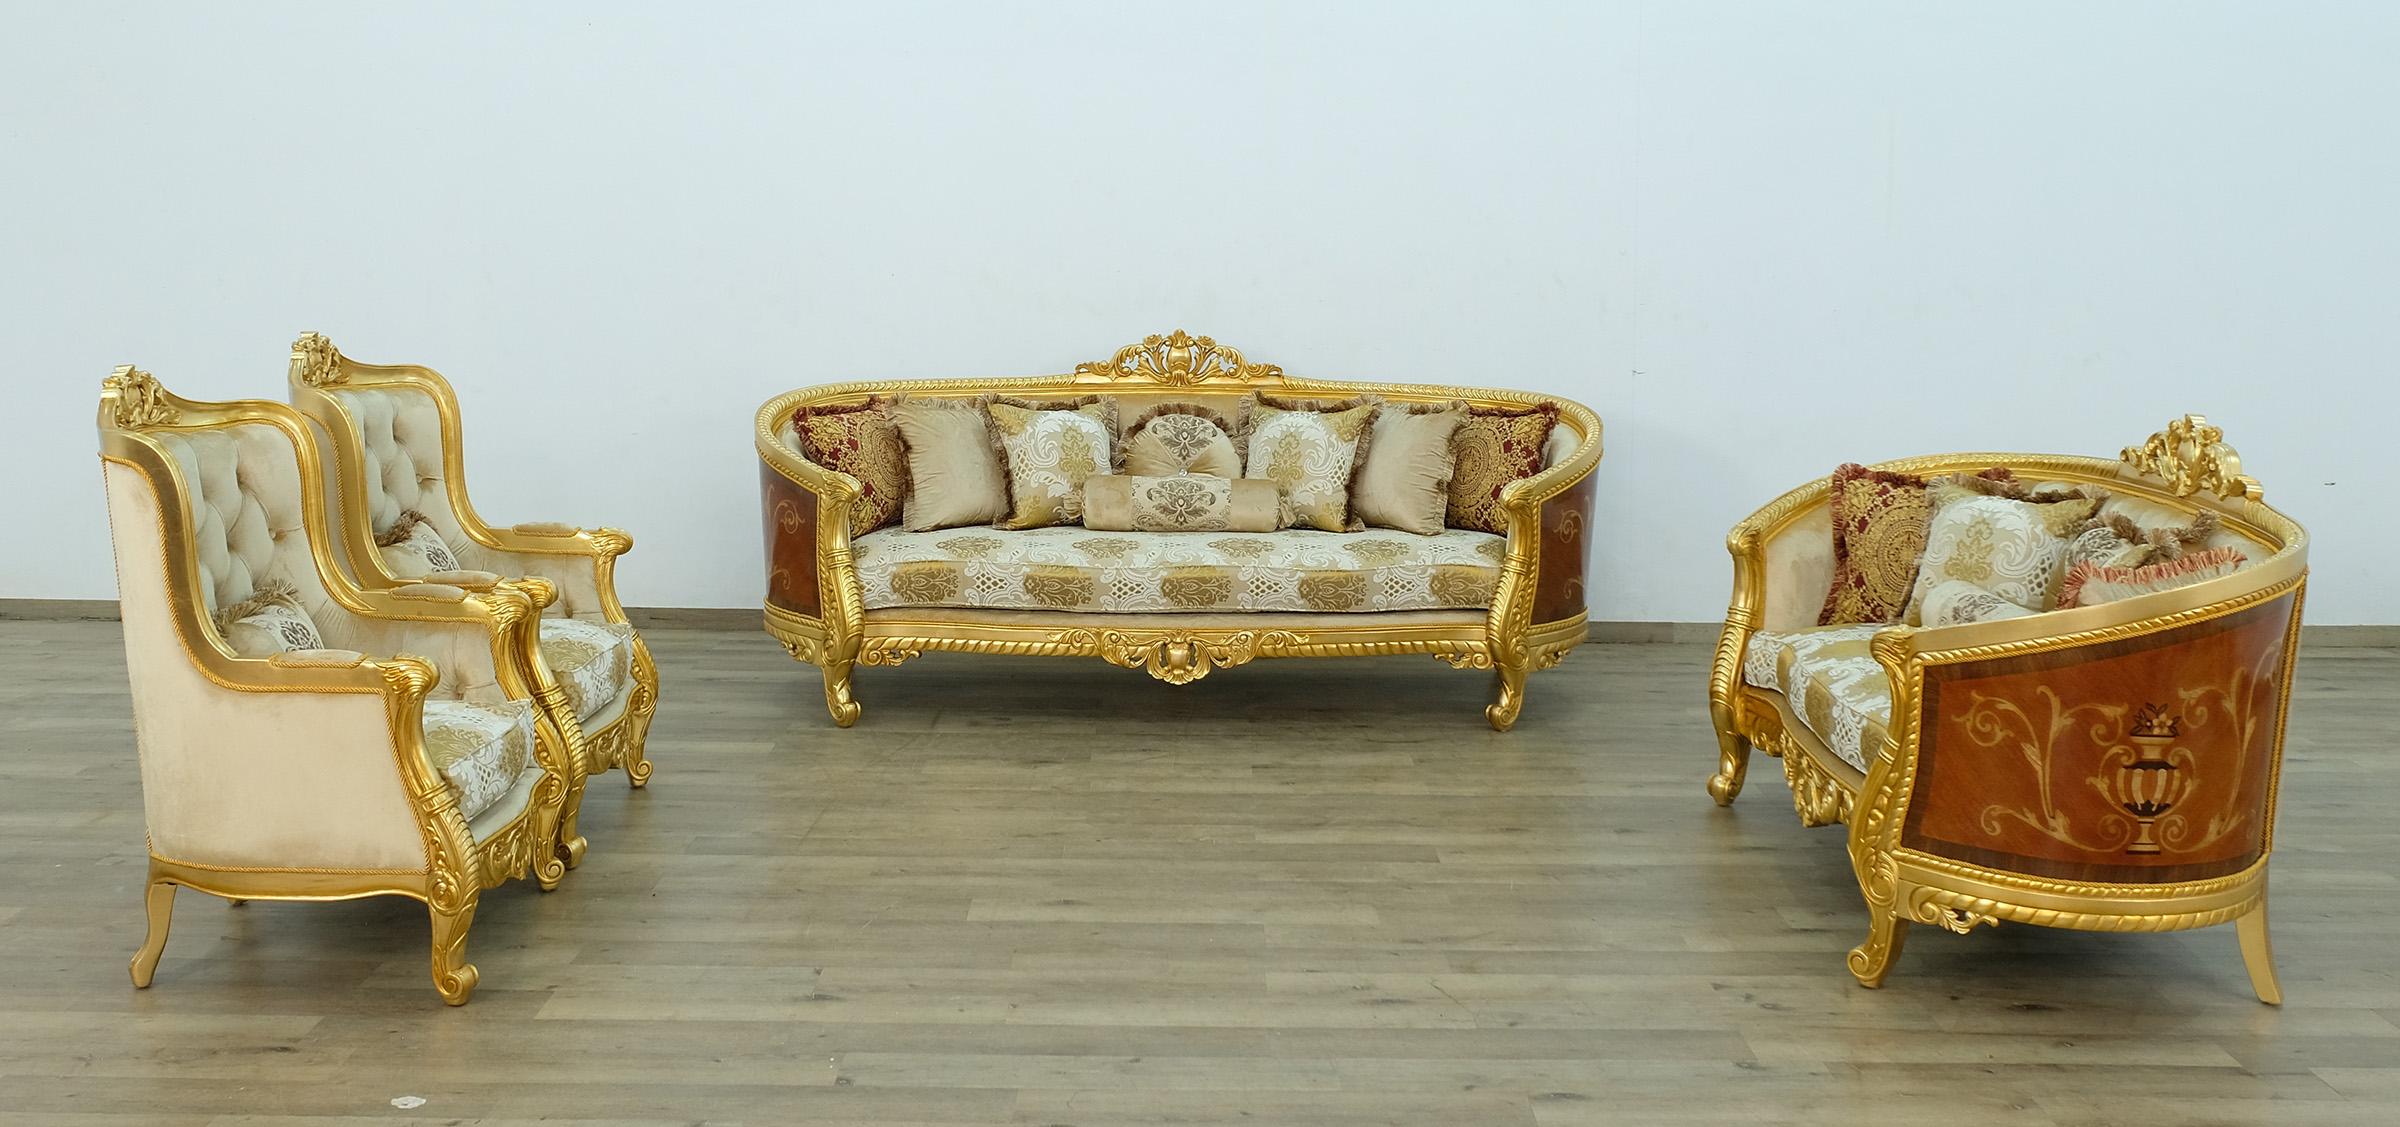 

    
Imperial Luxury Gold Fabric LUXOR Sofa Set 2Ps EUROPEAN FURNITURE Solid Wood
